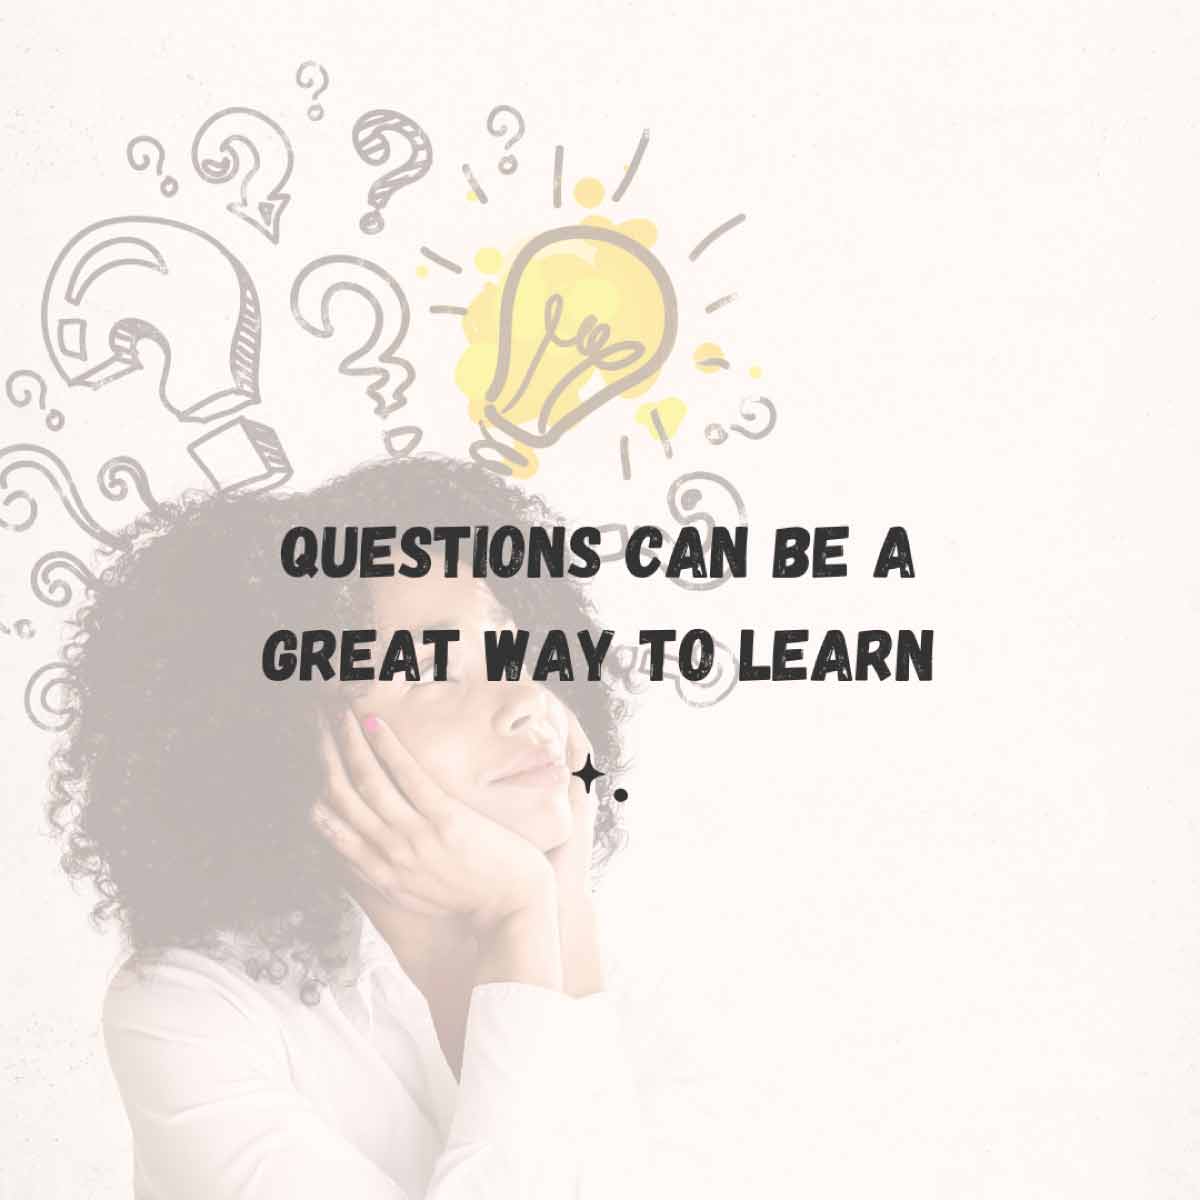 Questions can be a great way to learn. A woman with her hands on her chin looking slightly upward with question marks and a lightbulb over her head.